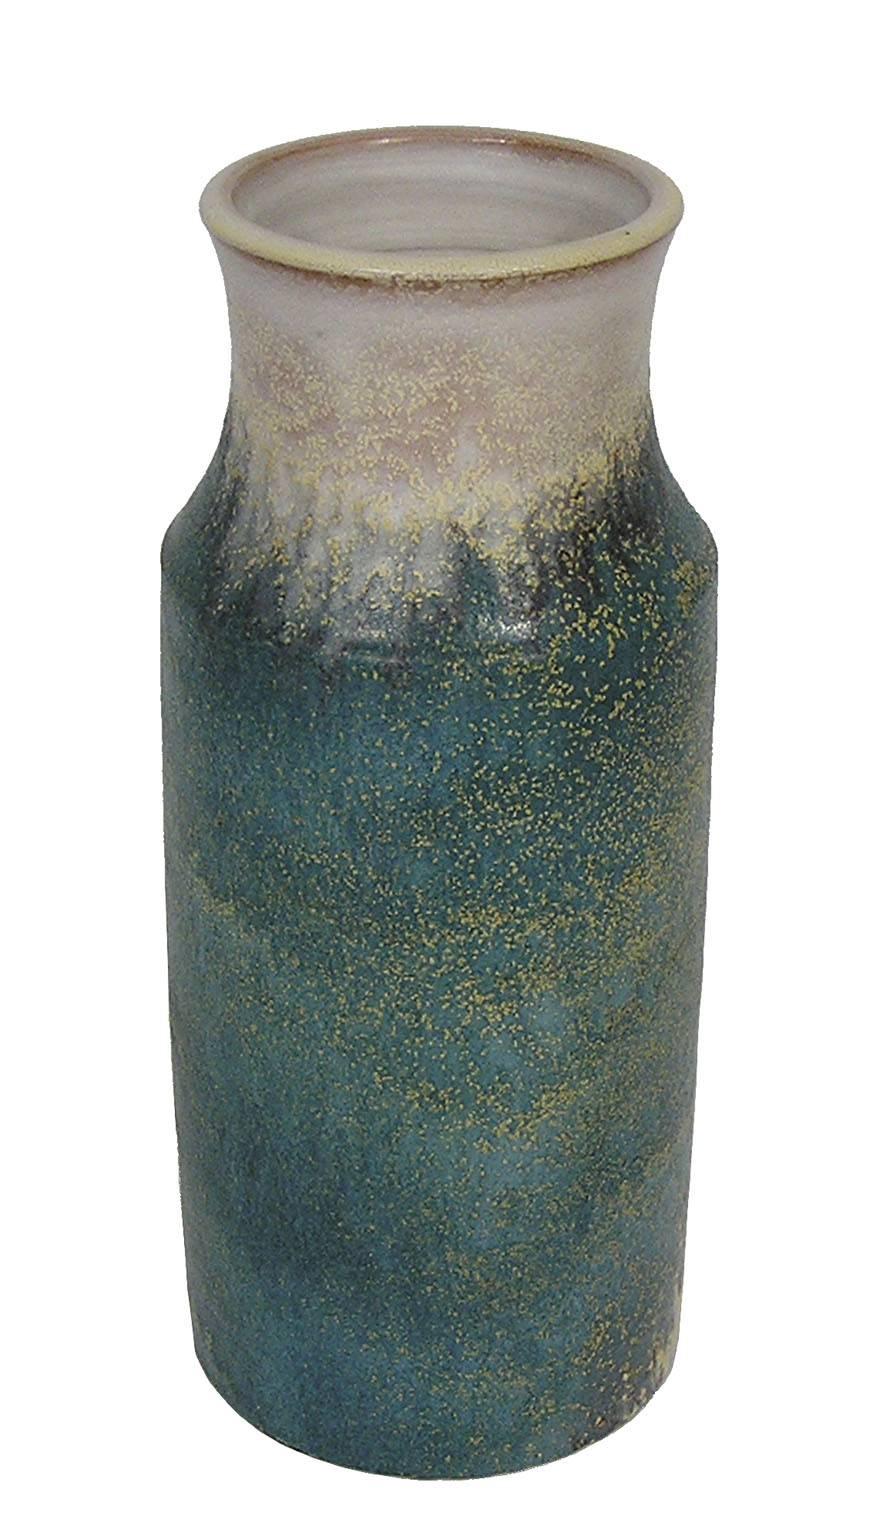 A ceramic pottery vase from the 1970s by Marcello Fantoni of Italy. Decorated throughout in a muti-tone matte and semi matte glaze. Signed on the bottom and in excellent condition.